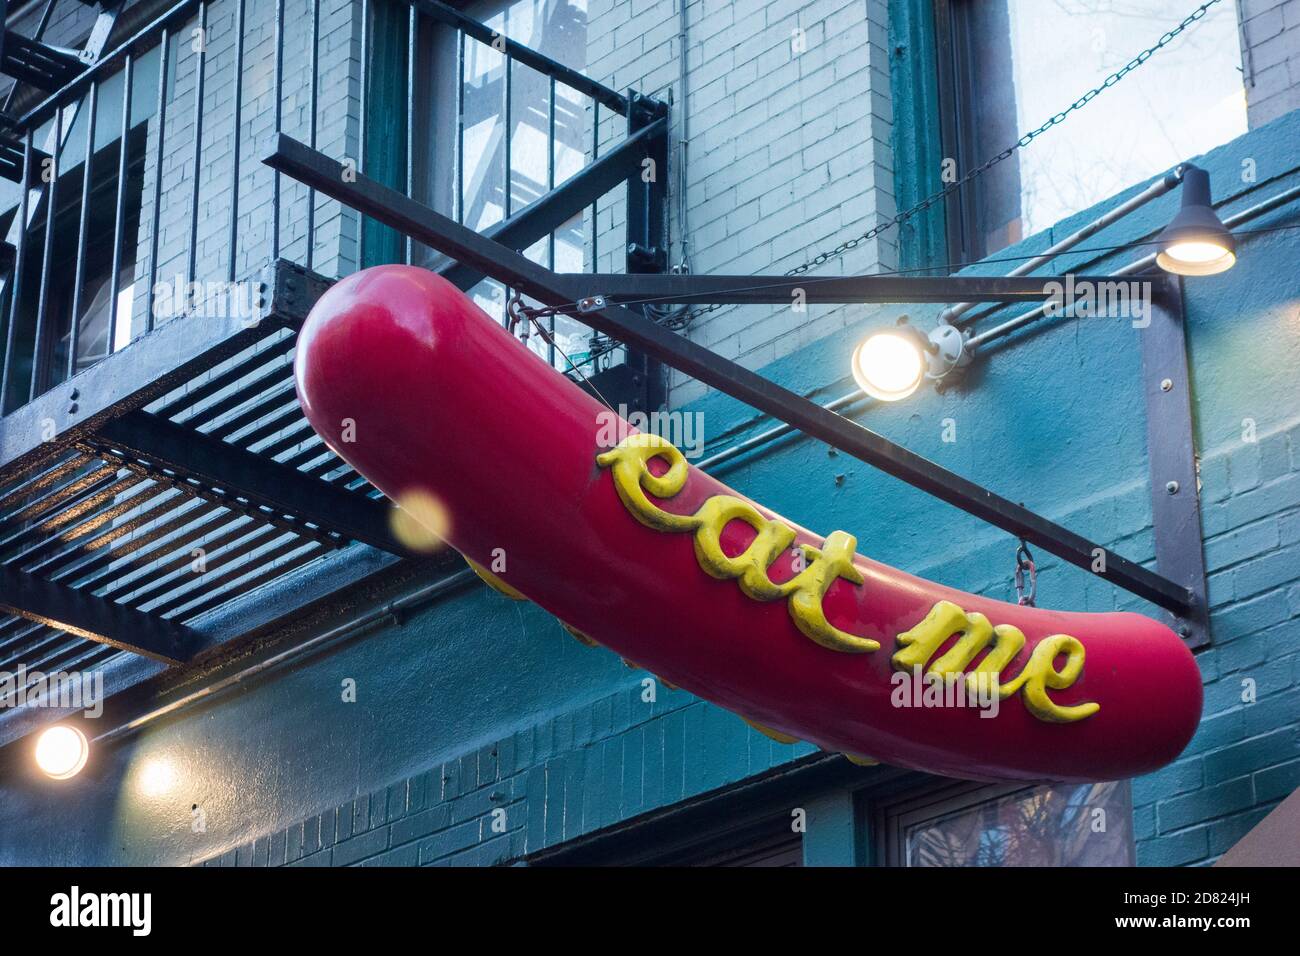 Crif Dogs restaurant sign in Manhattan NYC Stock Photo